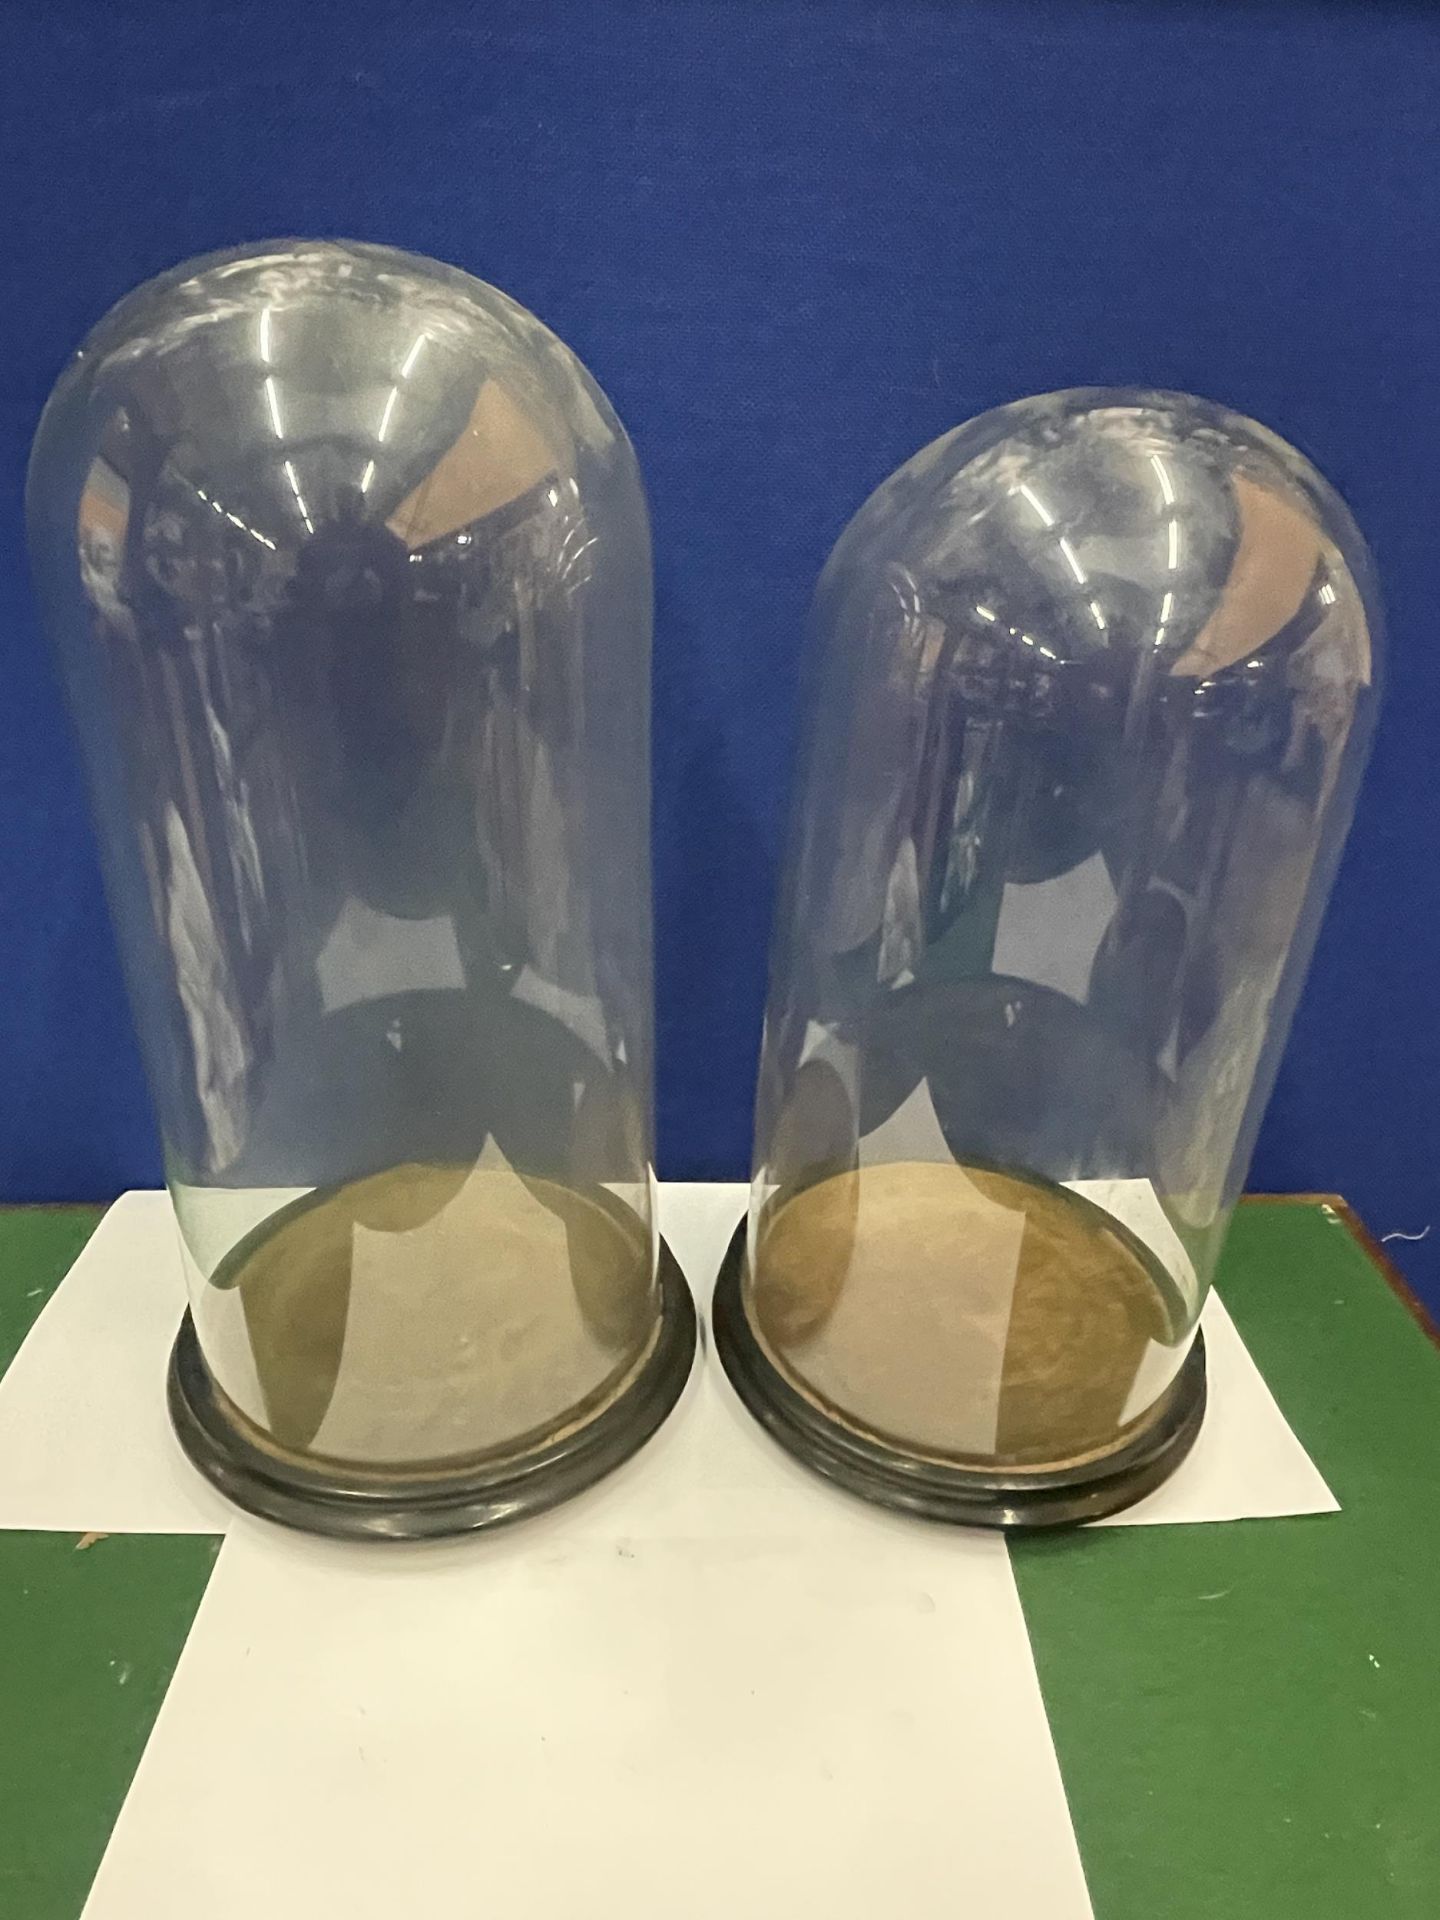 TWO TALL GLASS DOMES ON WOODEN BASES - 41CM AND 44 CM APPROX.